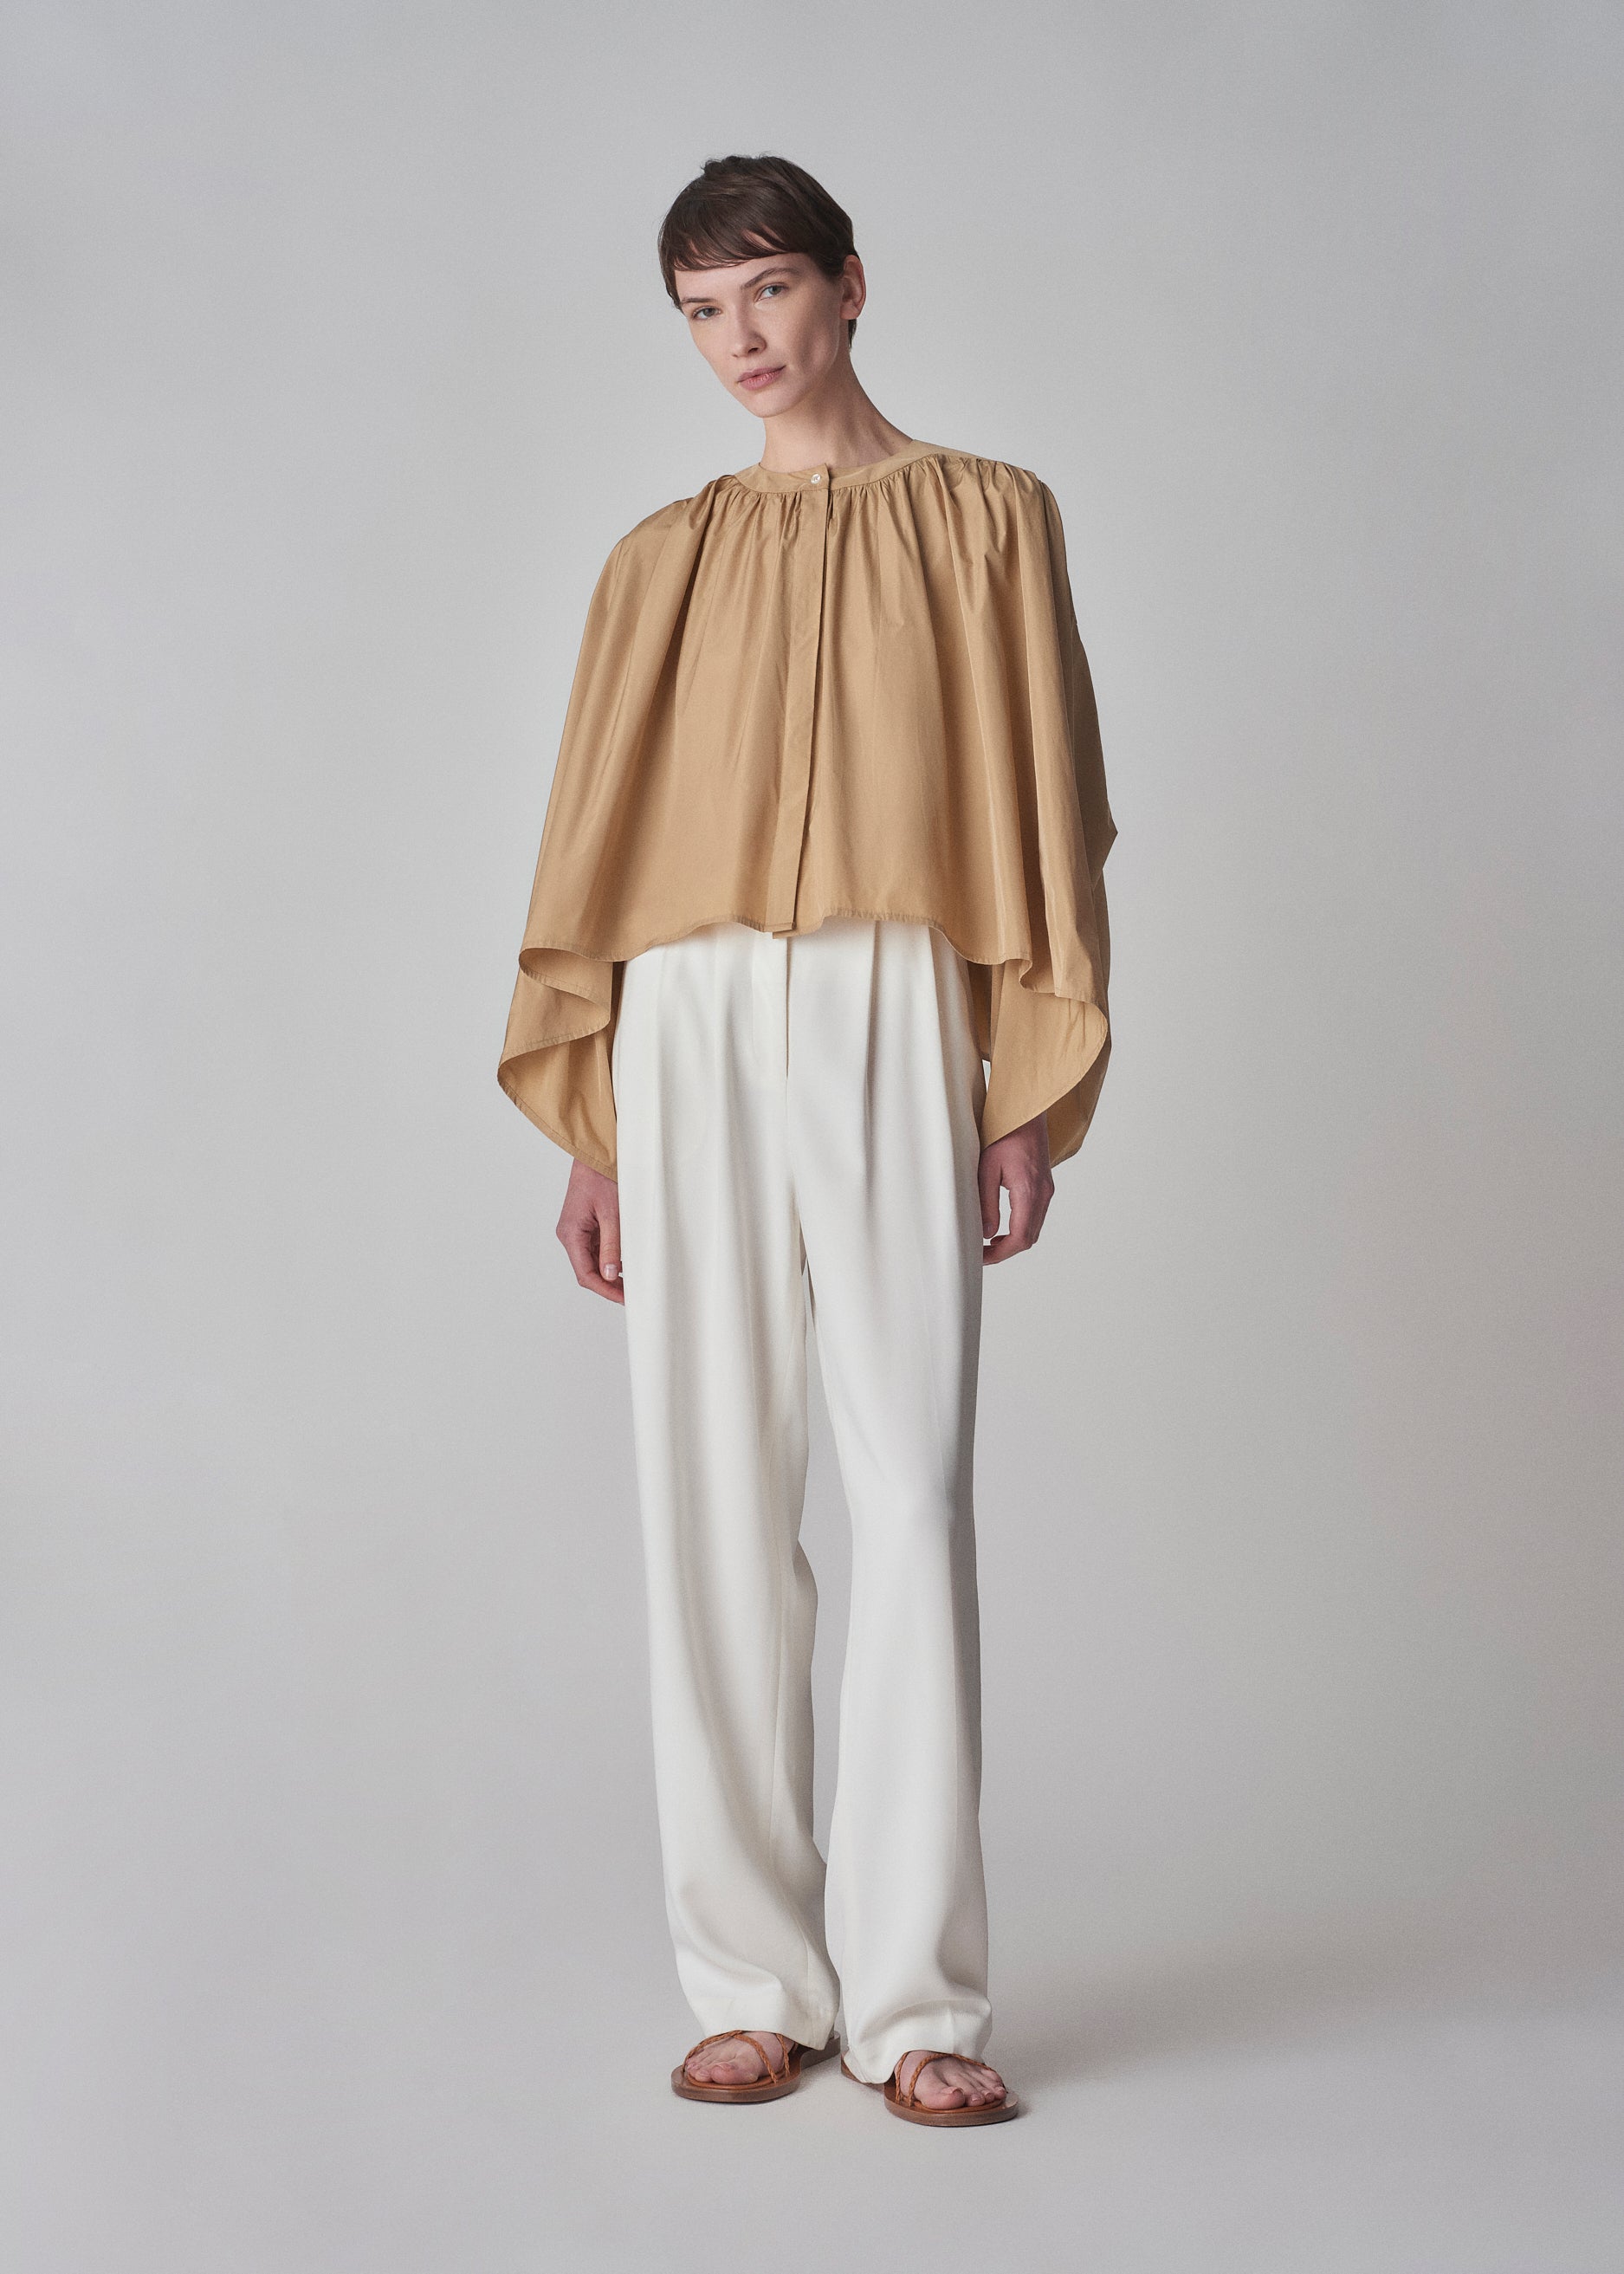 Gathered Tunic Blouse in Taffeta - Butterscotch - CO Collections